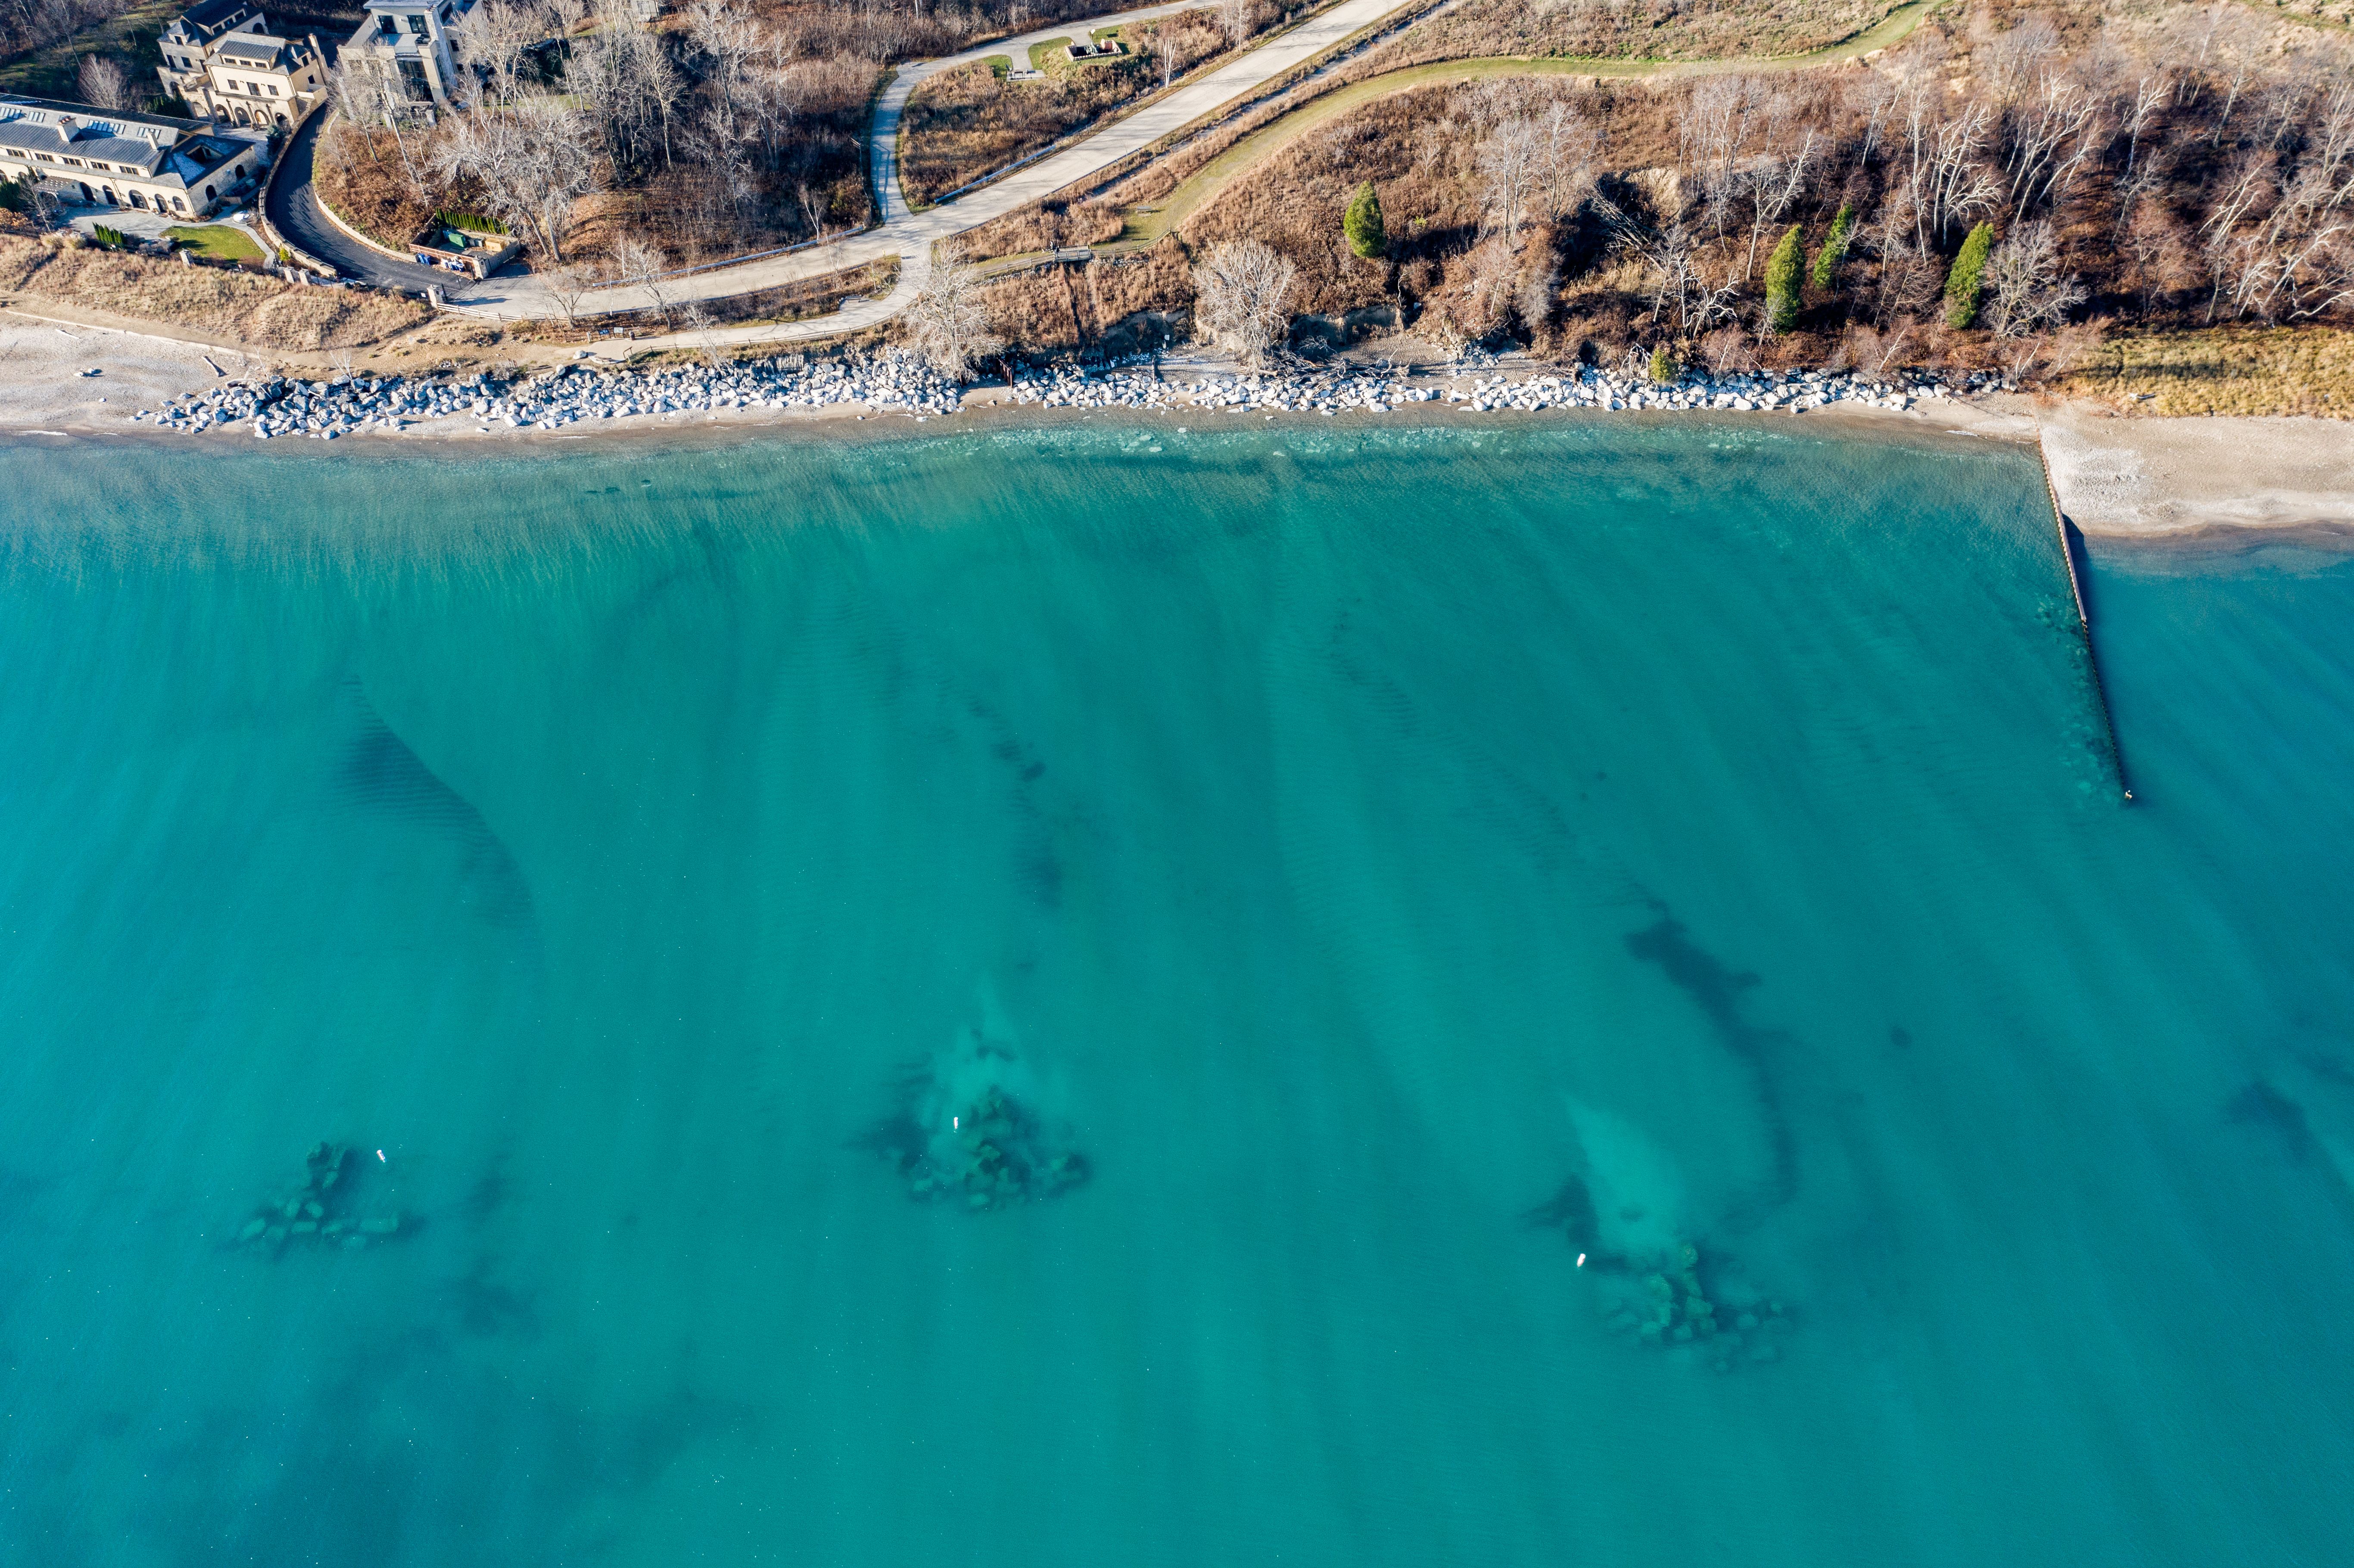 The underwater reefs in Lake Michigan are being installed at Fort Sheridan Forest Preserve in Lake Forest on Nov. 12, 2020. Image by Zbigniew Bzdak/Chicago Tribune. United States, 2020.